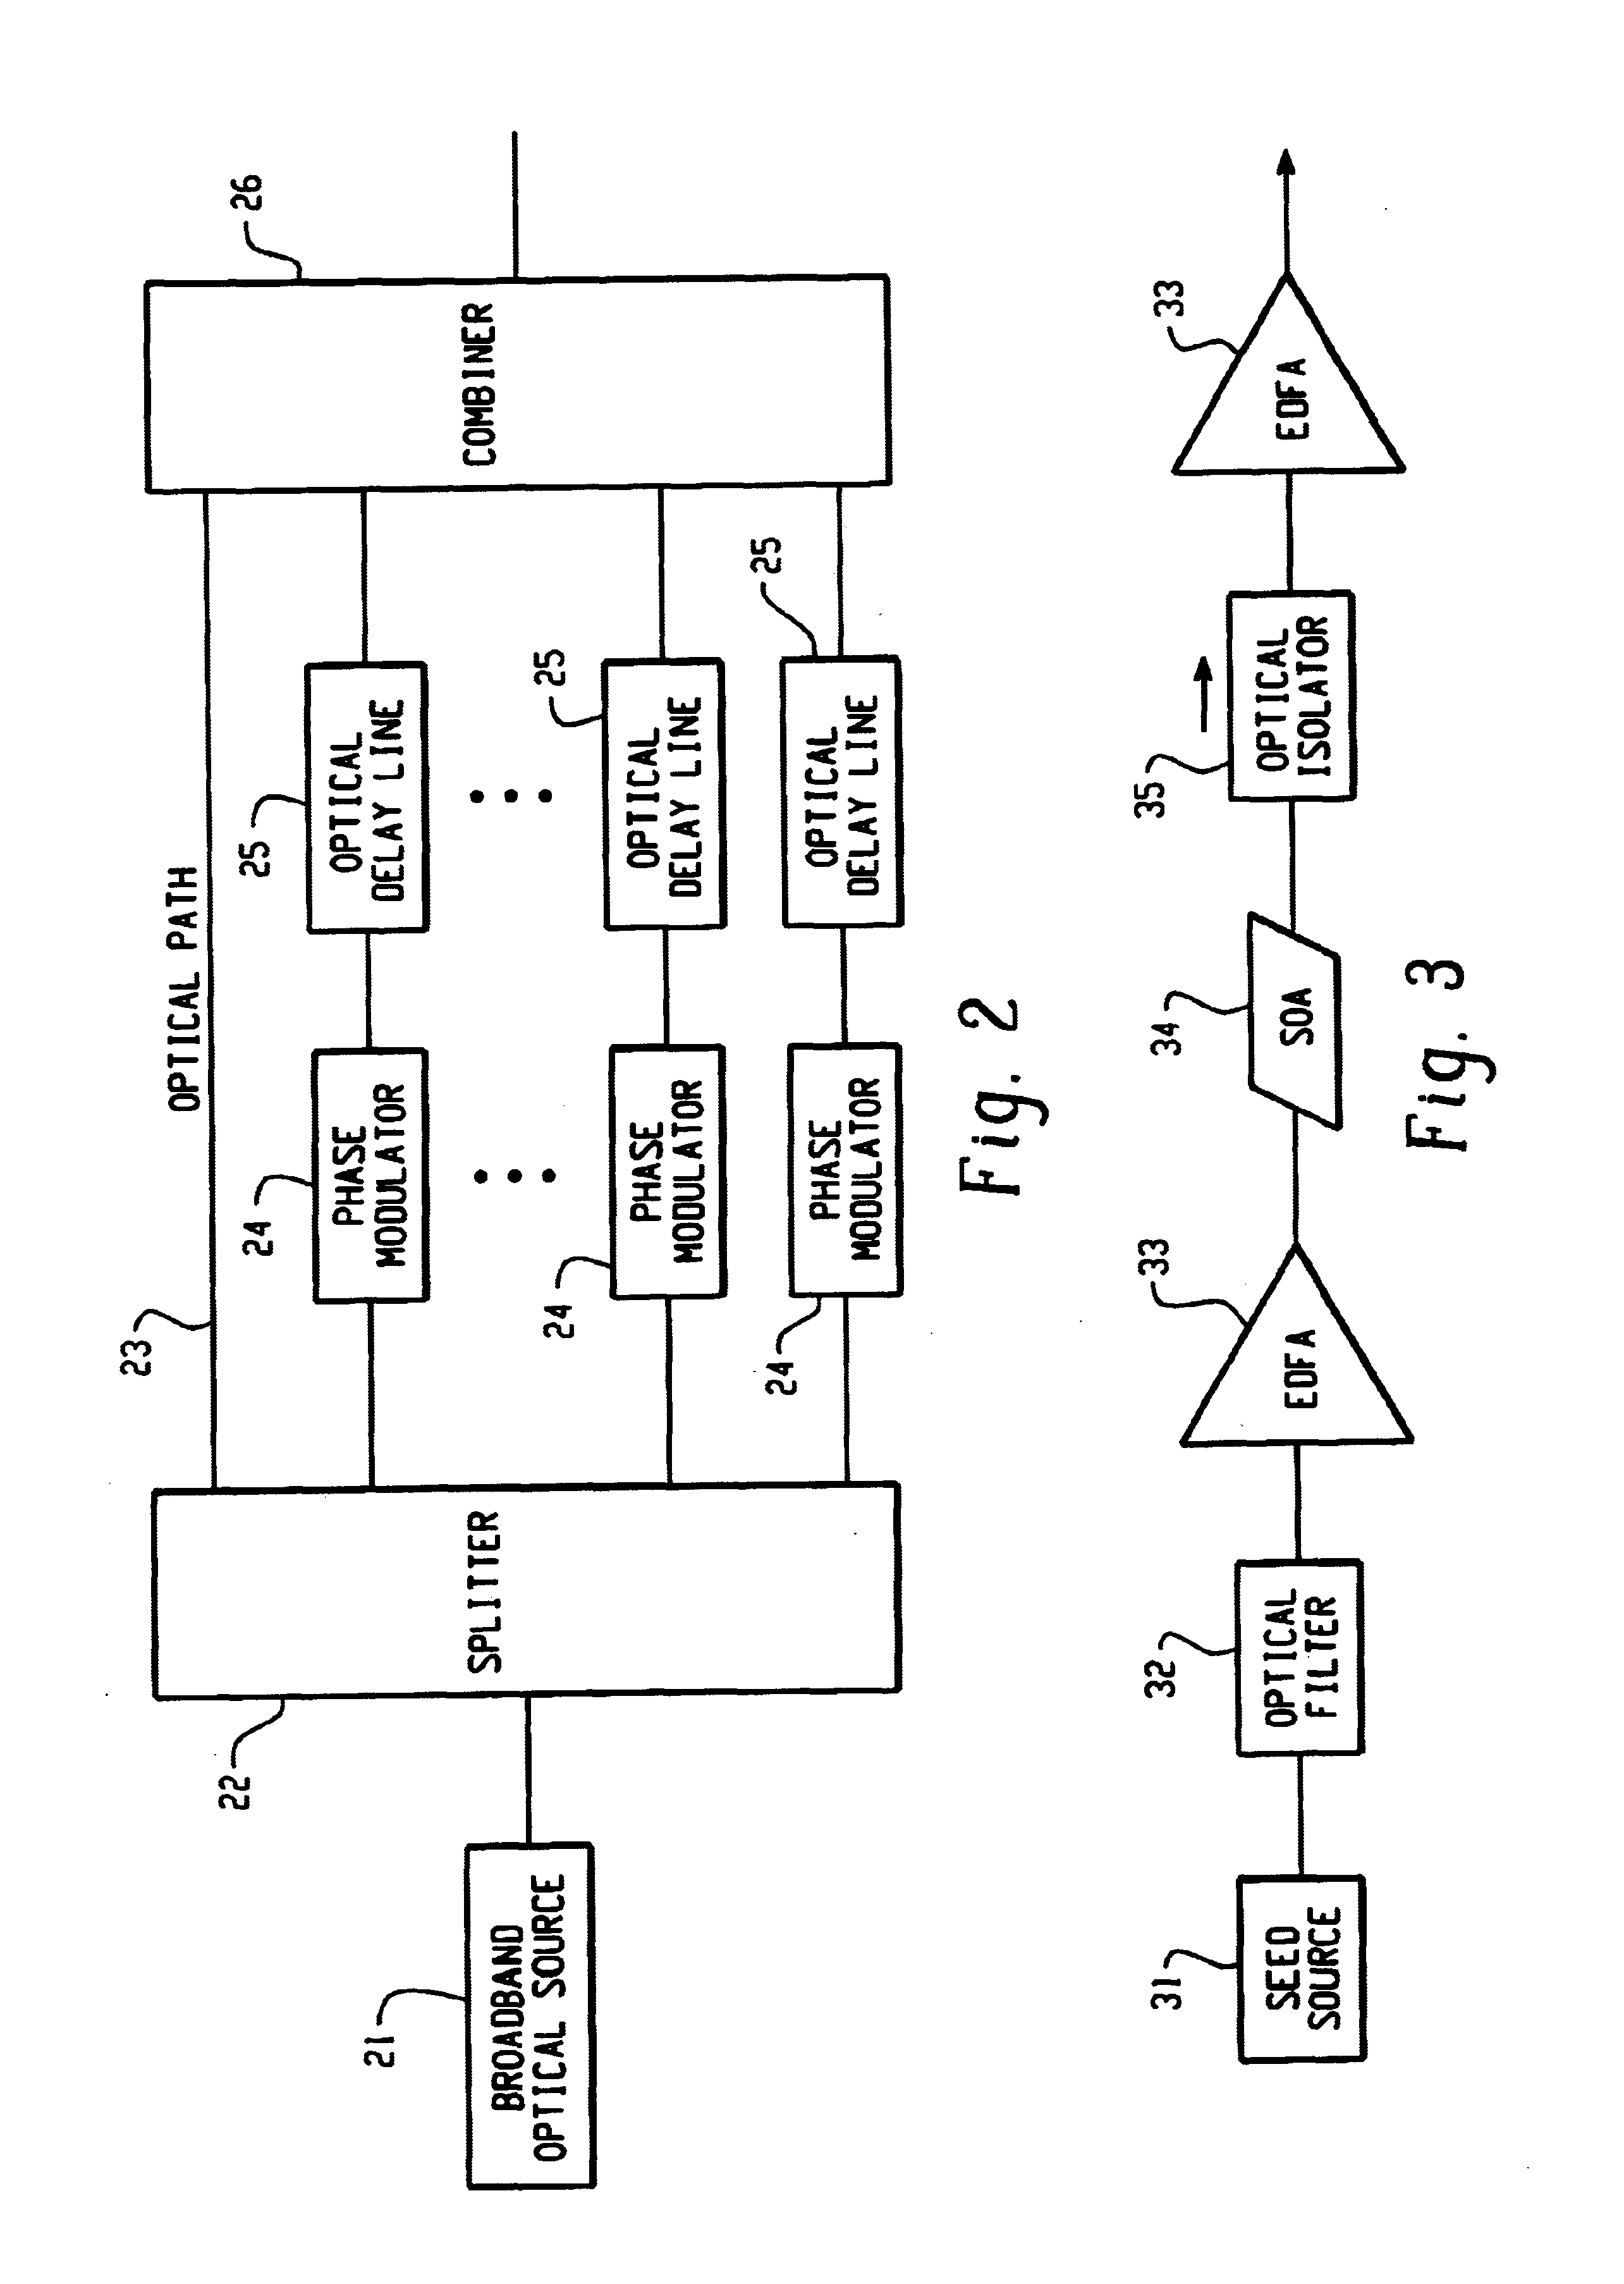 Multichannel optical communication system and method utilizing wavelength and coherence division multiplexing